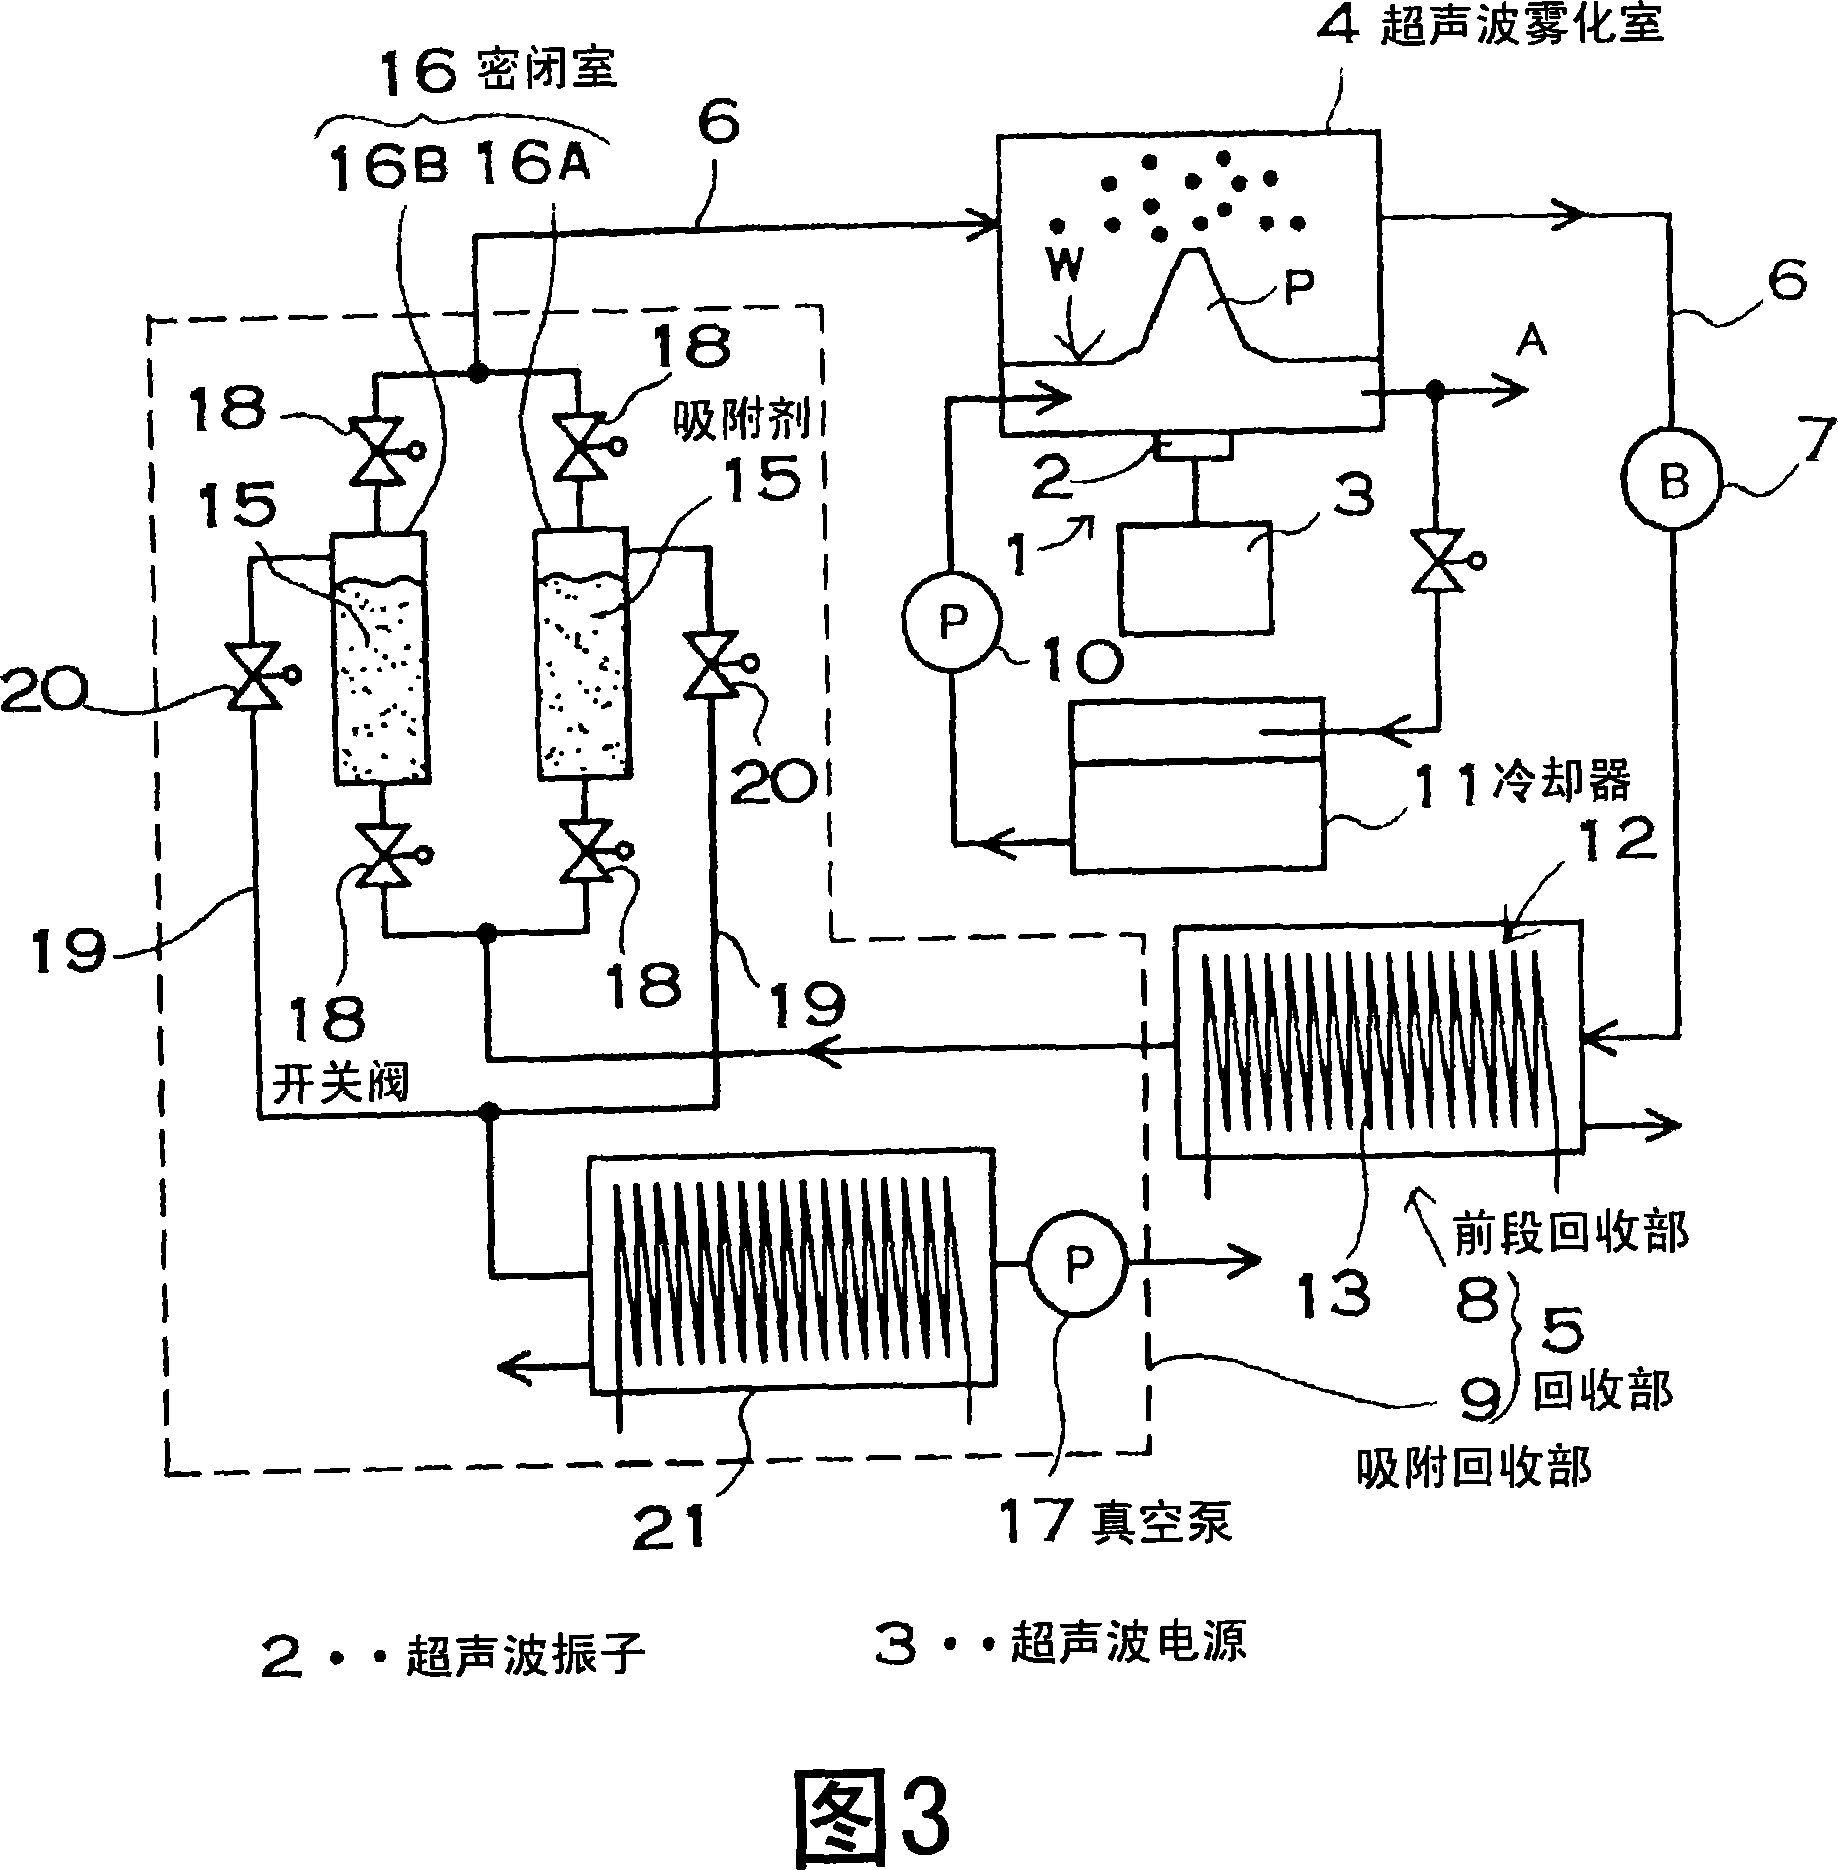 Ultrasonic solution separating method and ultrasonic separating apparatus used in this method